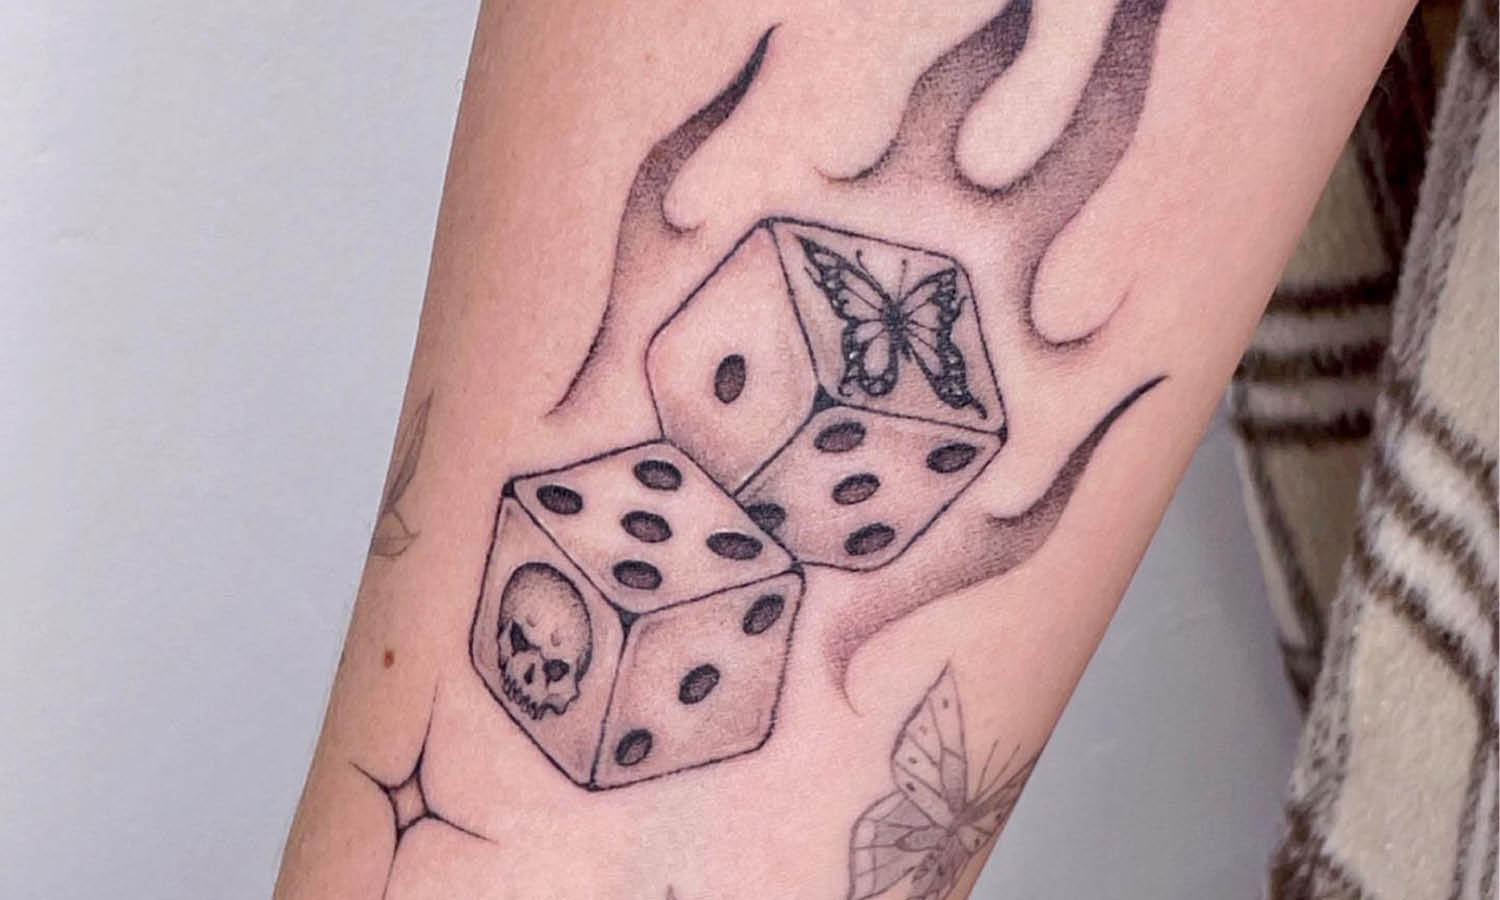 30 Best Dice Tattoo Ideas You Should Check